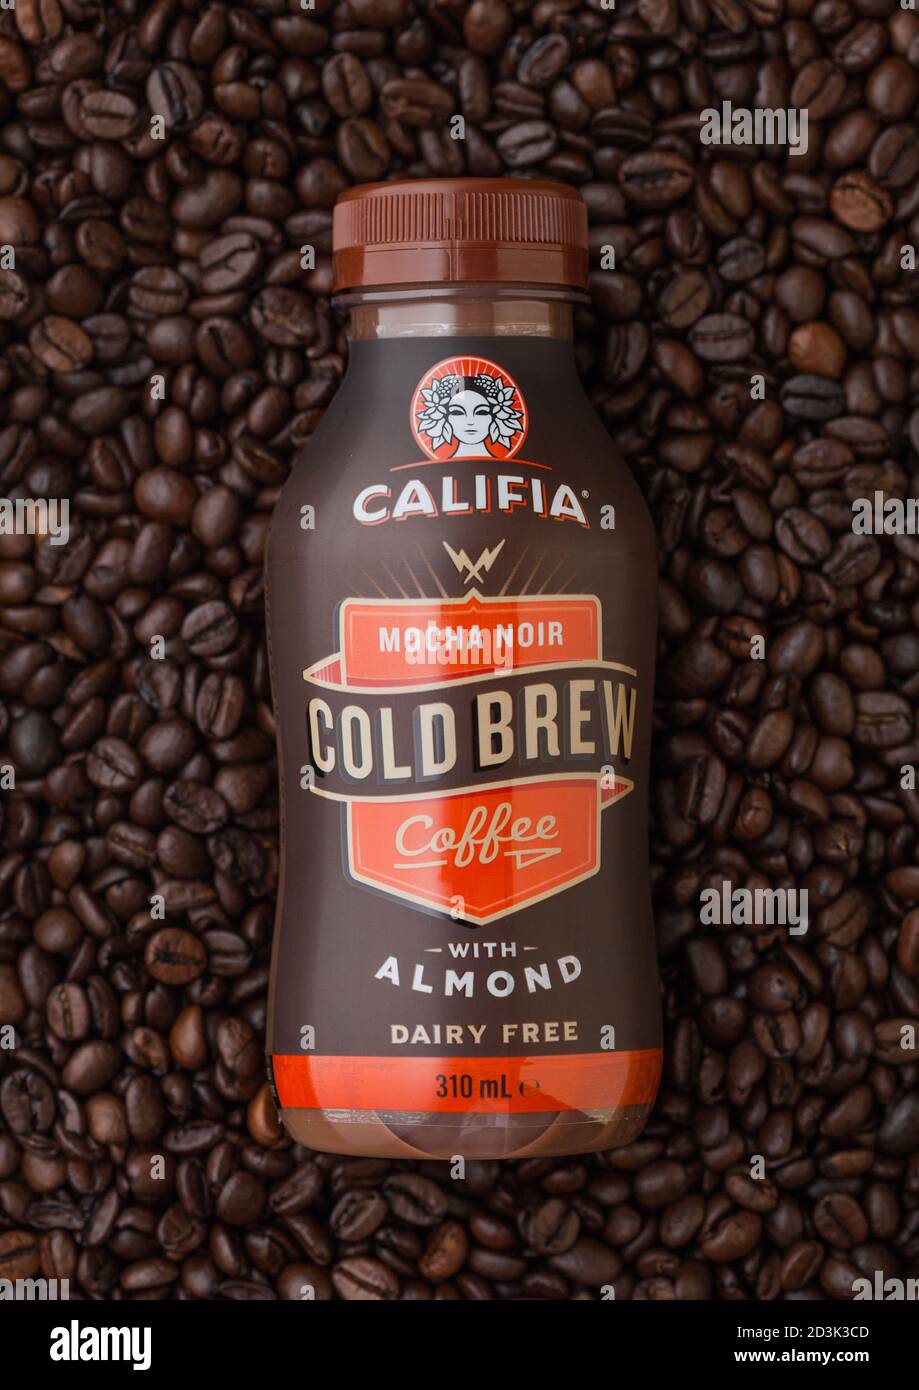 LONDON, UK - SEPTEMBER 09, 2020: Bottle of cold Califia mocha noir coffee with almonds on top of fresh raw coffee beans. Stock Photo